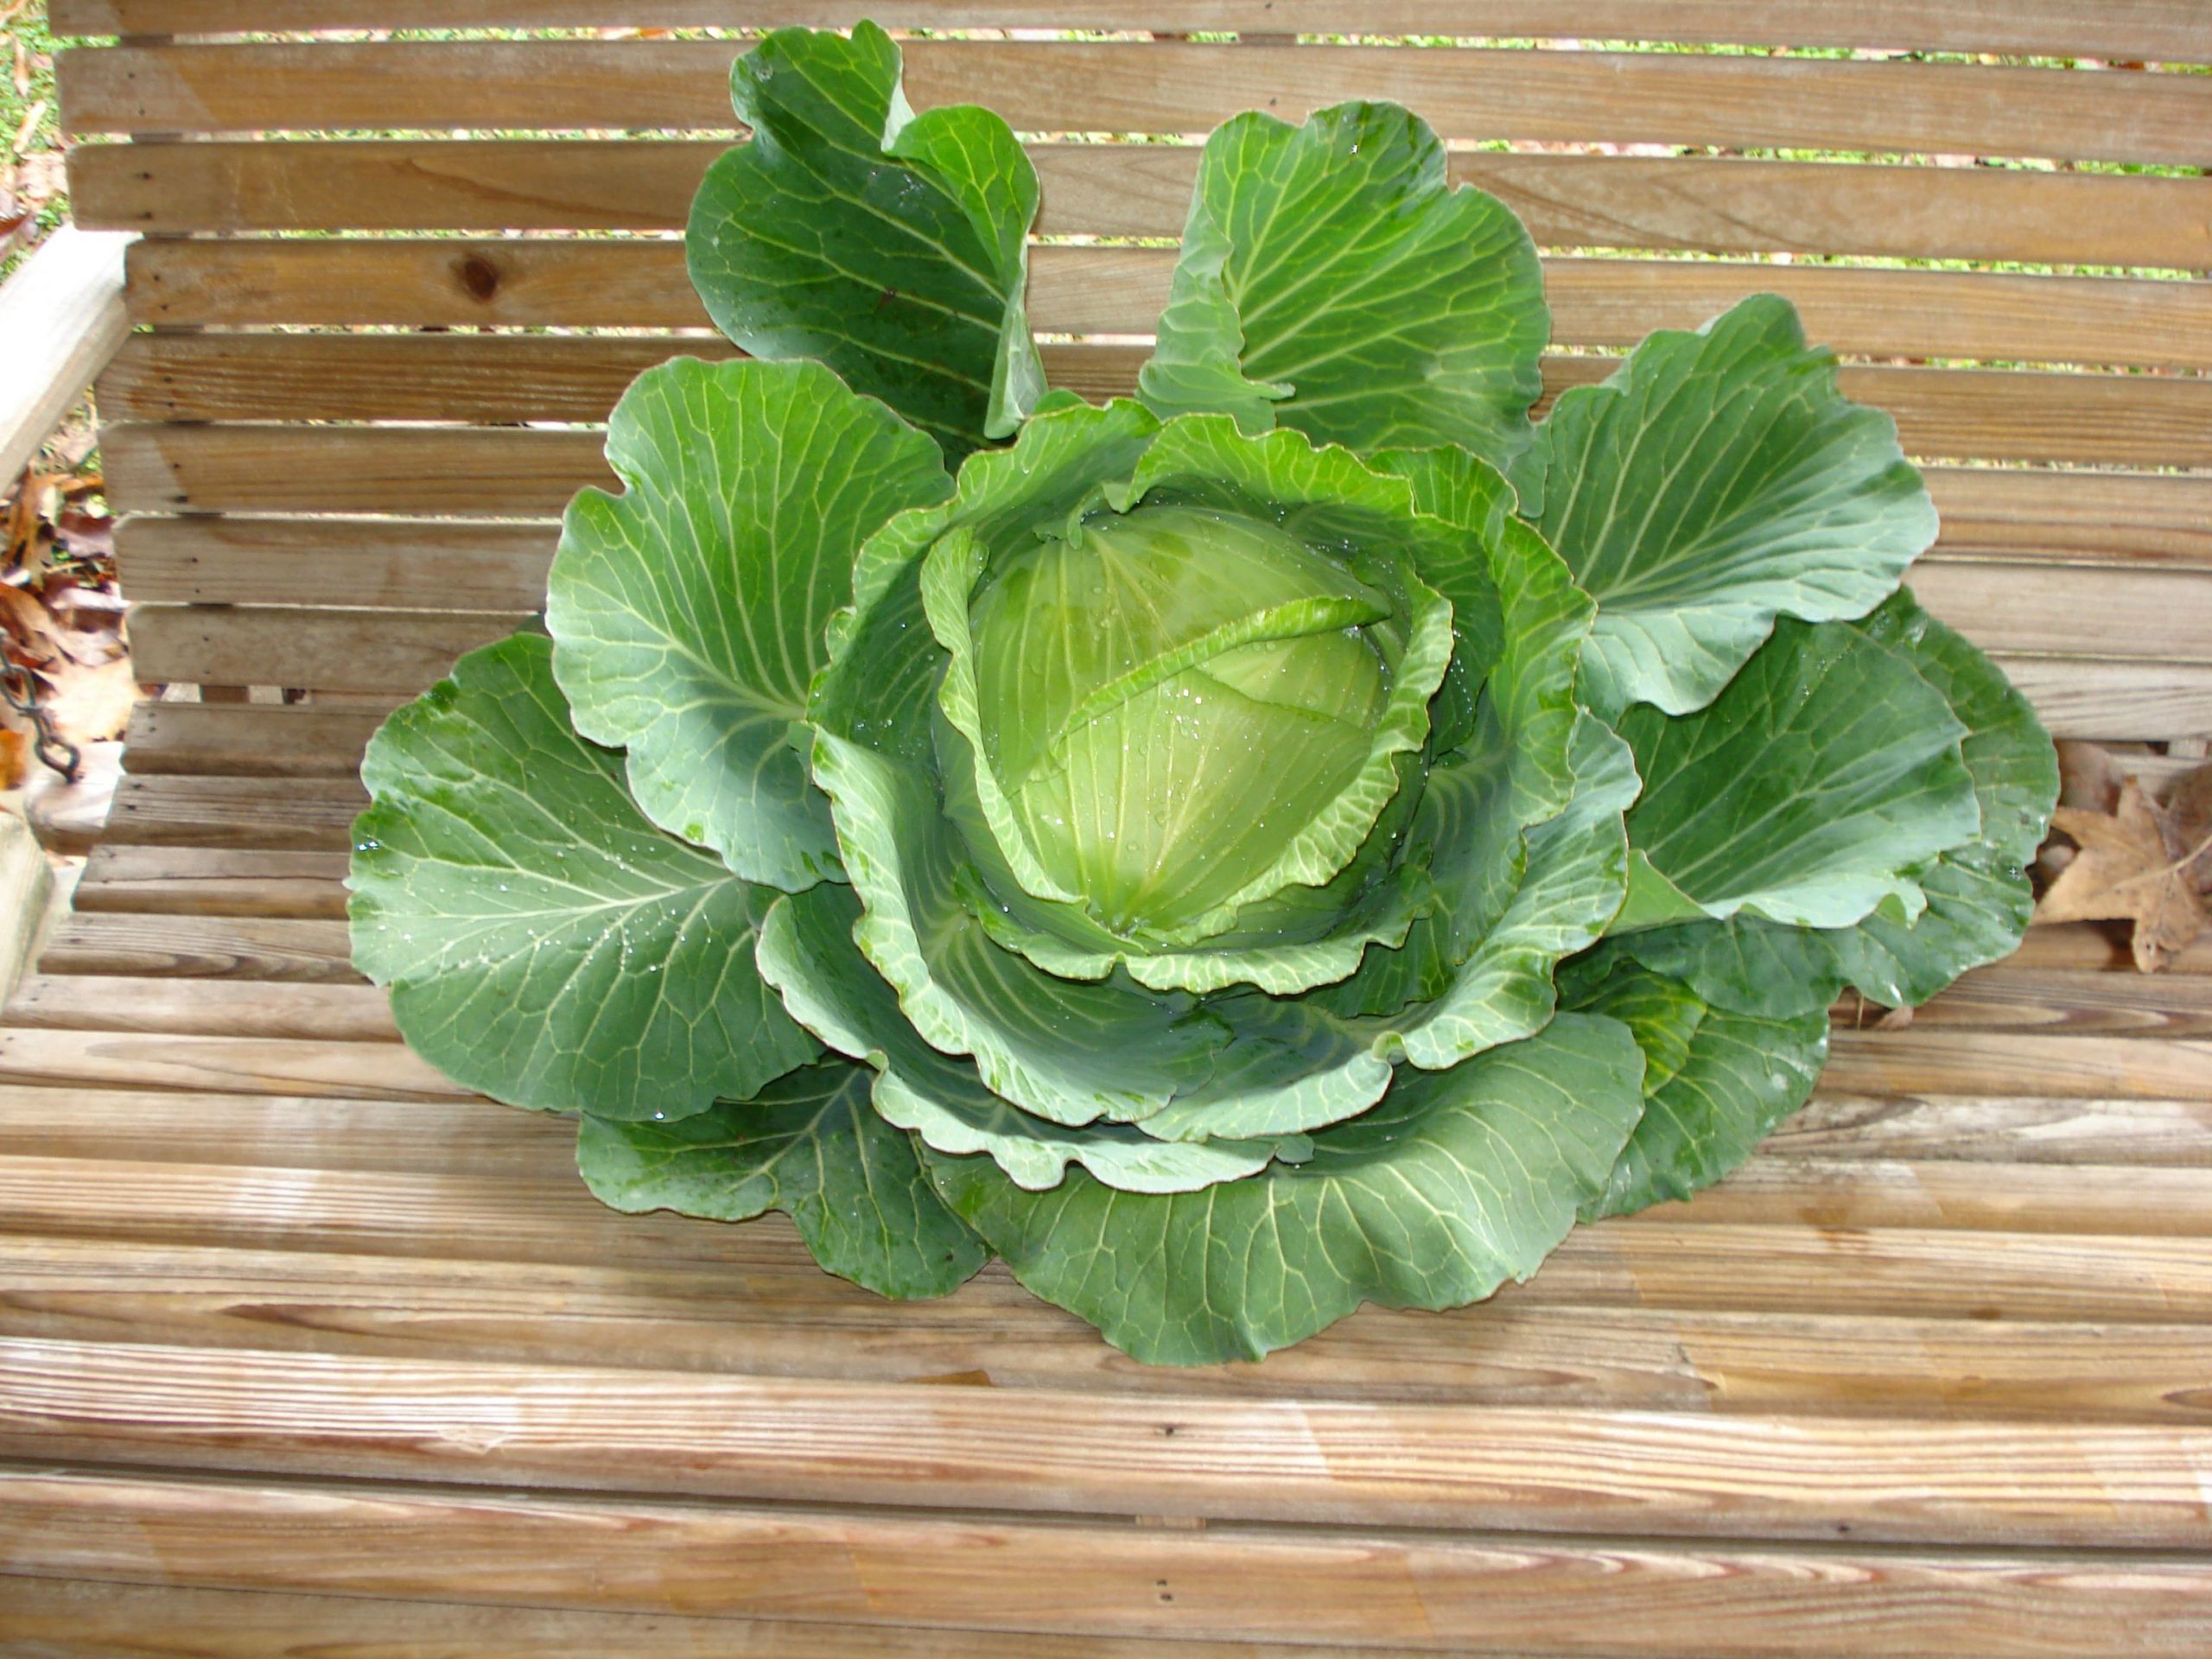 Cabbage New Years
 Happy New Years Cabbage